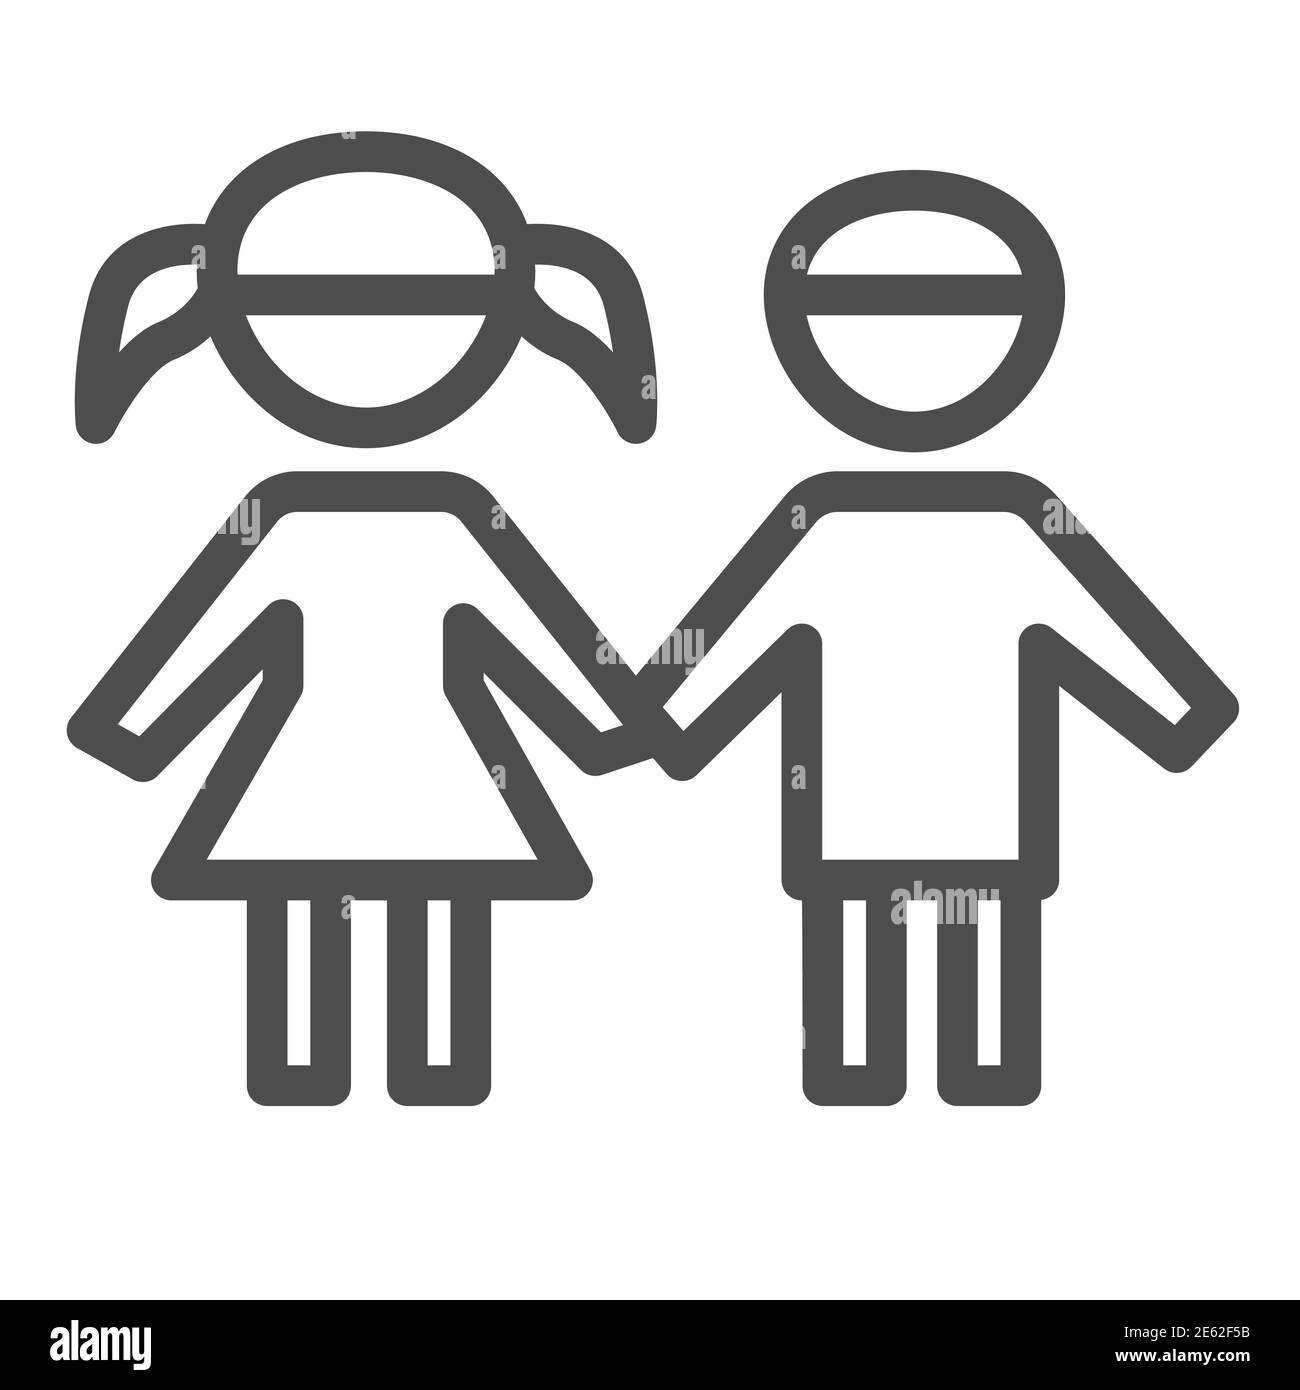 Boy and girl line icon, 1st June children protection day concept, children silhouettes sign on white background, Brother and sister symbol in outline Stock Vector